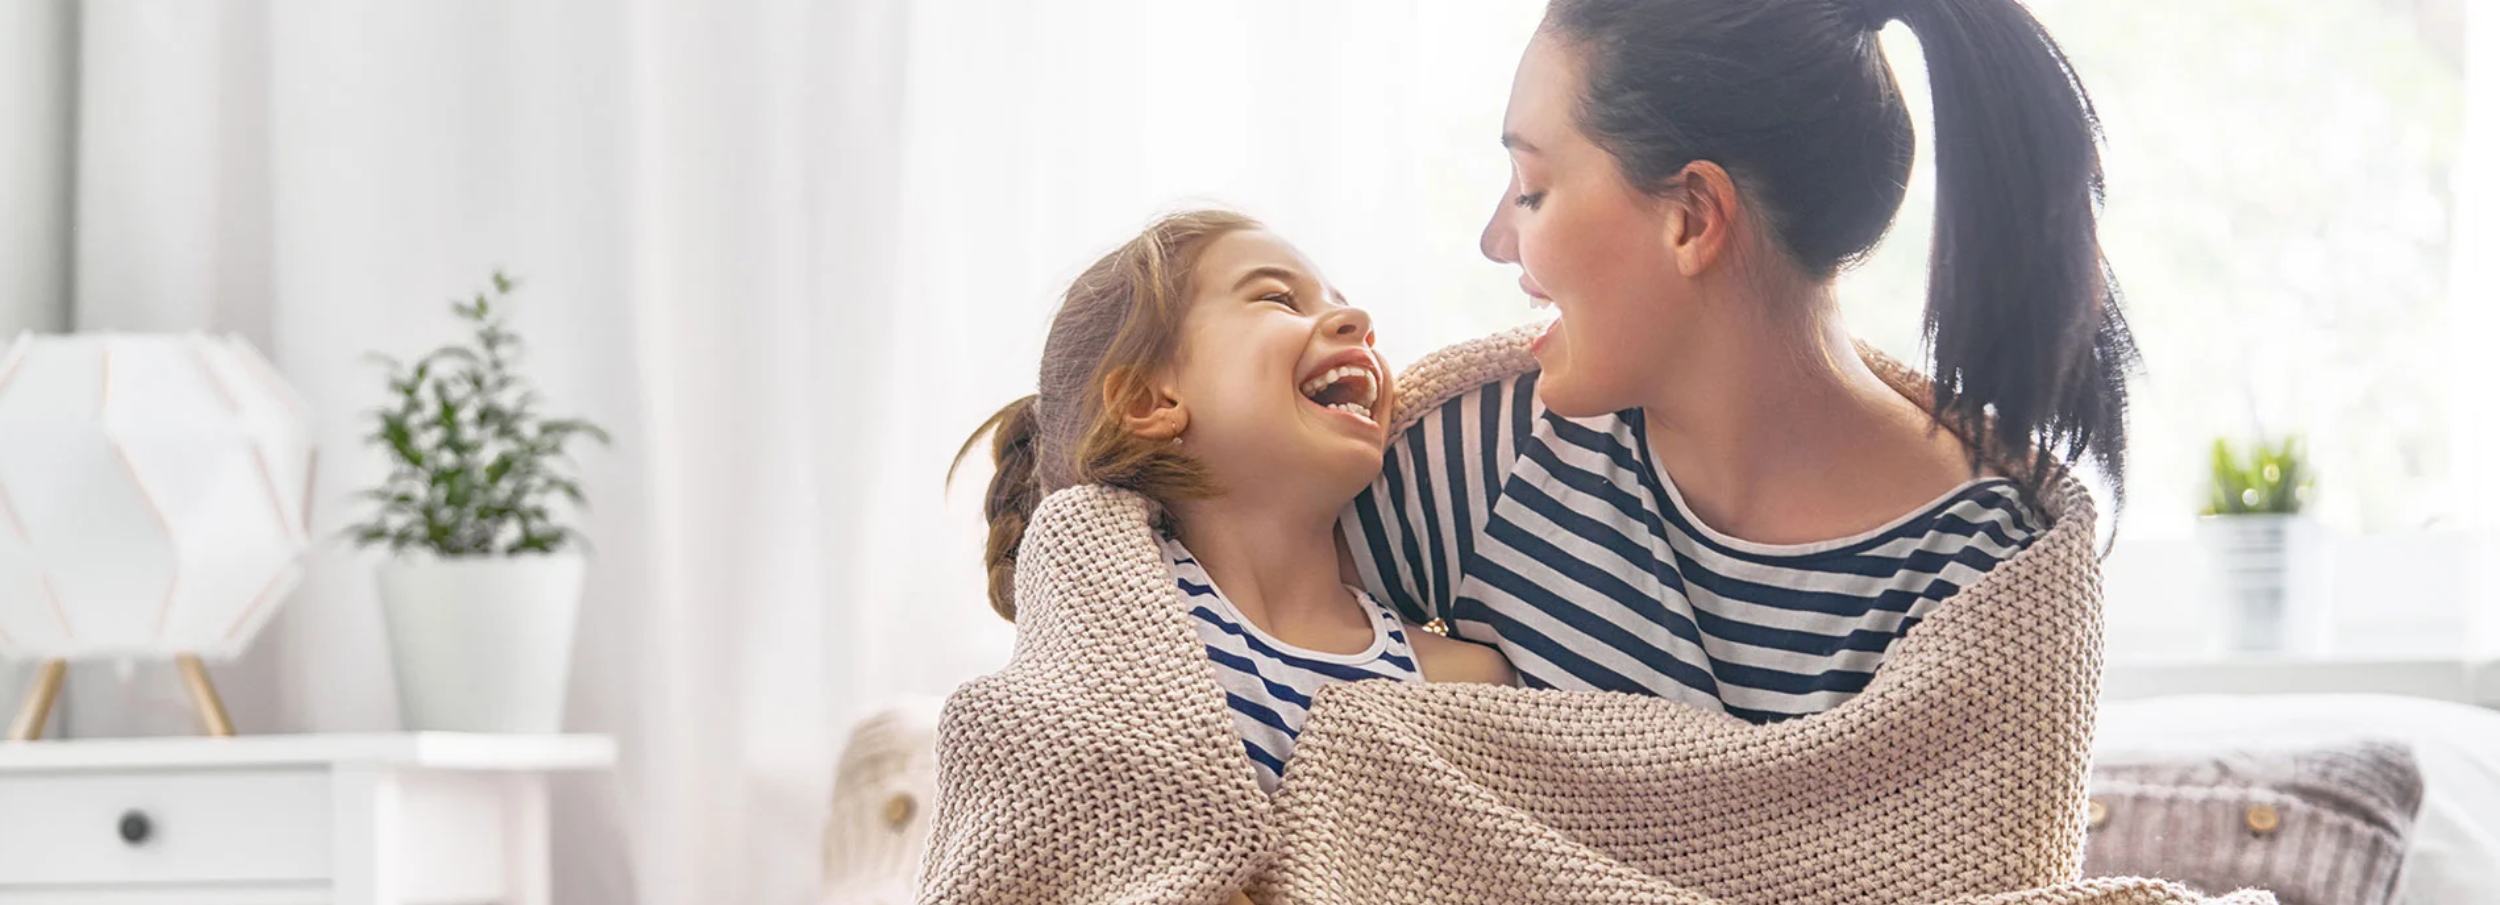 Mother and daughter laughing at each while wrapped in blanket.